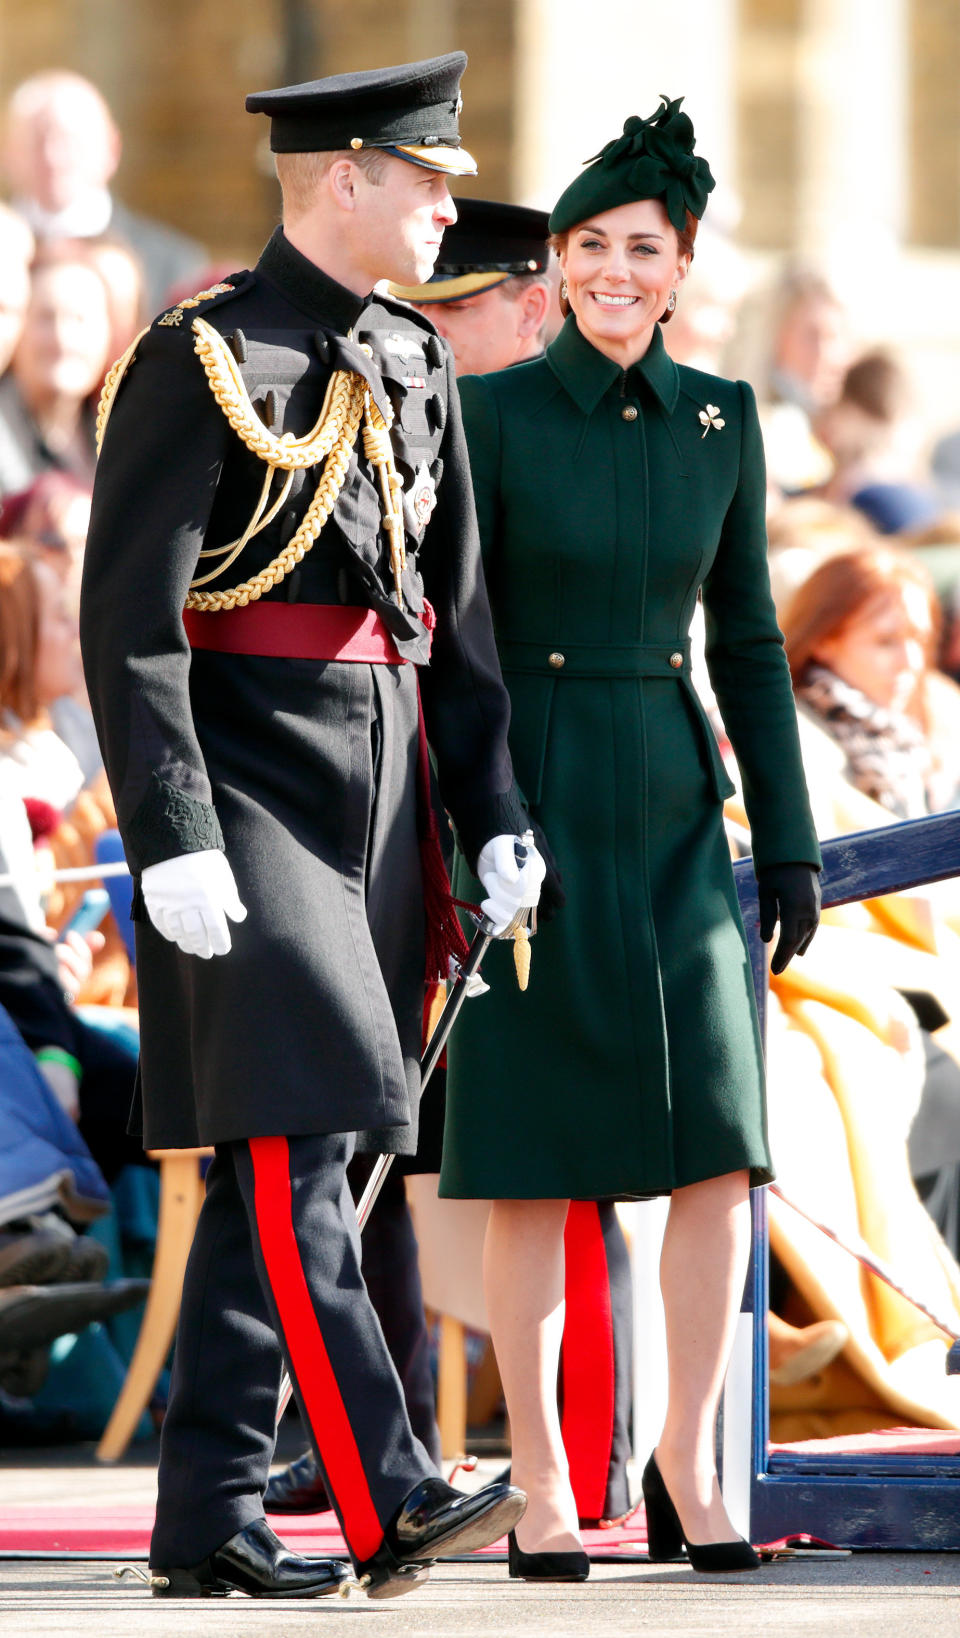 Catherine, Duchess of Cambridge and Prince William, Duke of Cambridge (Colonel of the Irish Guards) attend the 1st Battalion Irish Guards St Patrick's Day Parade at Cavalry Barracks on March 17 in Hounslow, England. (Photo: Max Mumby/Indigo via Getty Images)